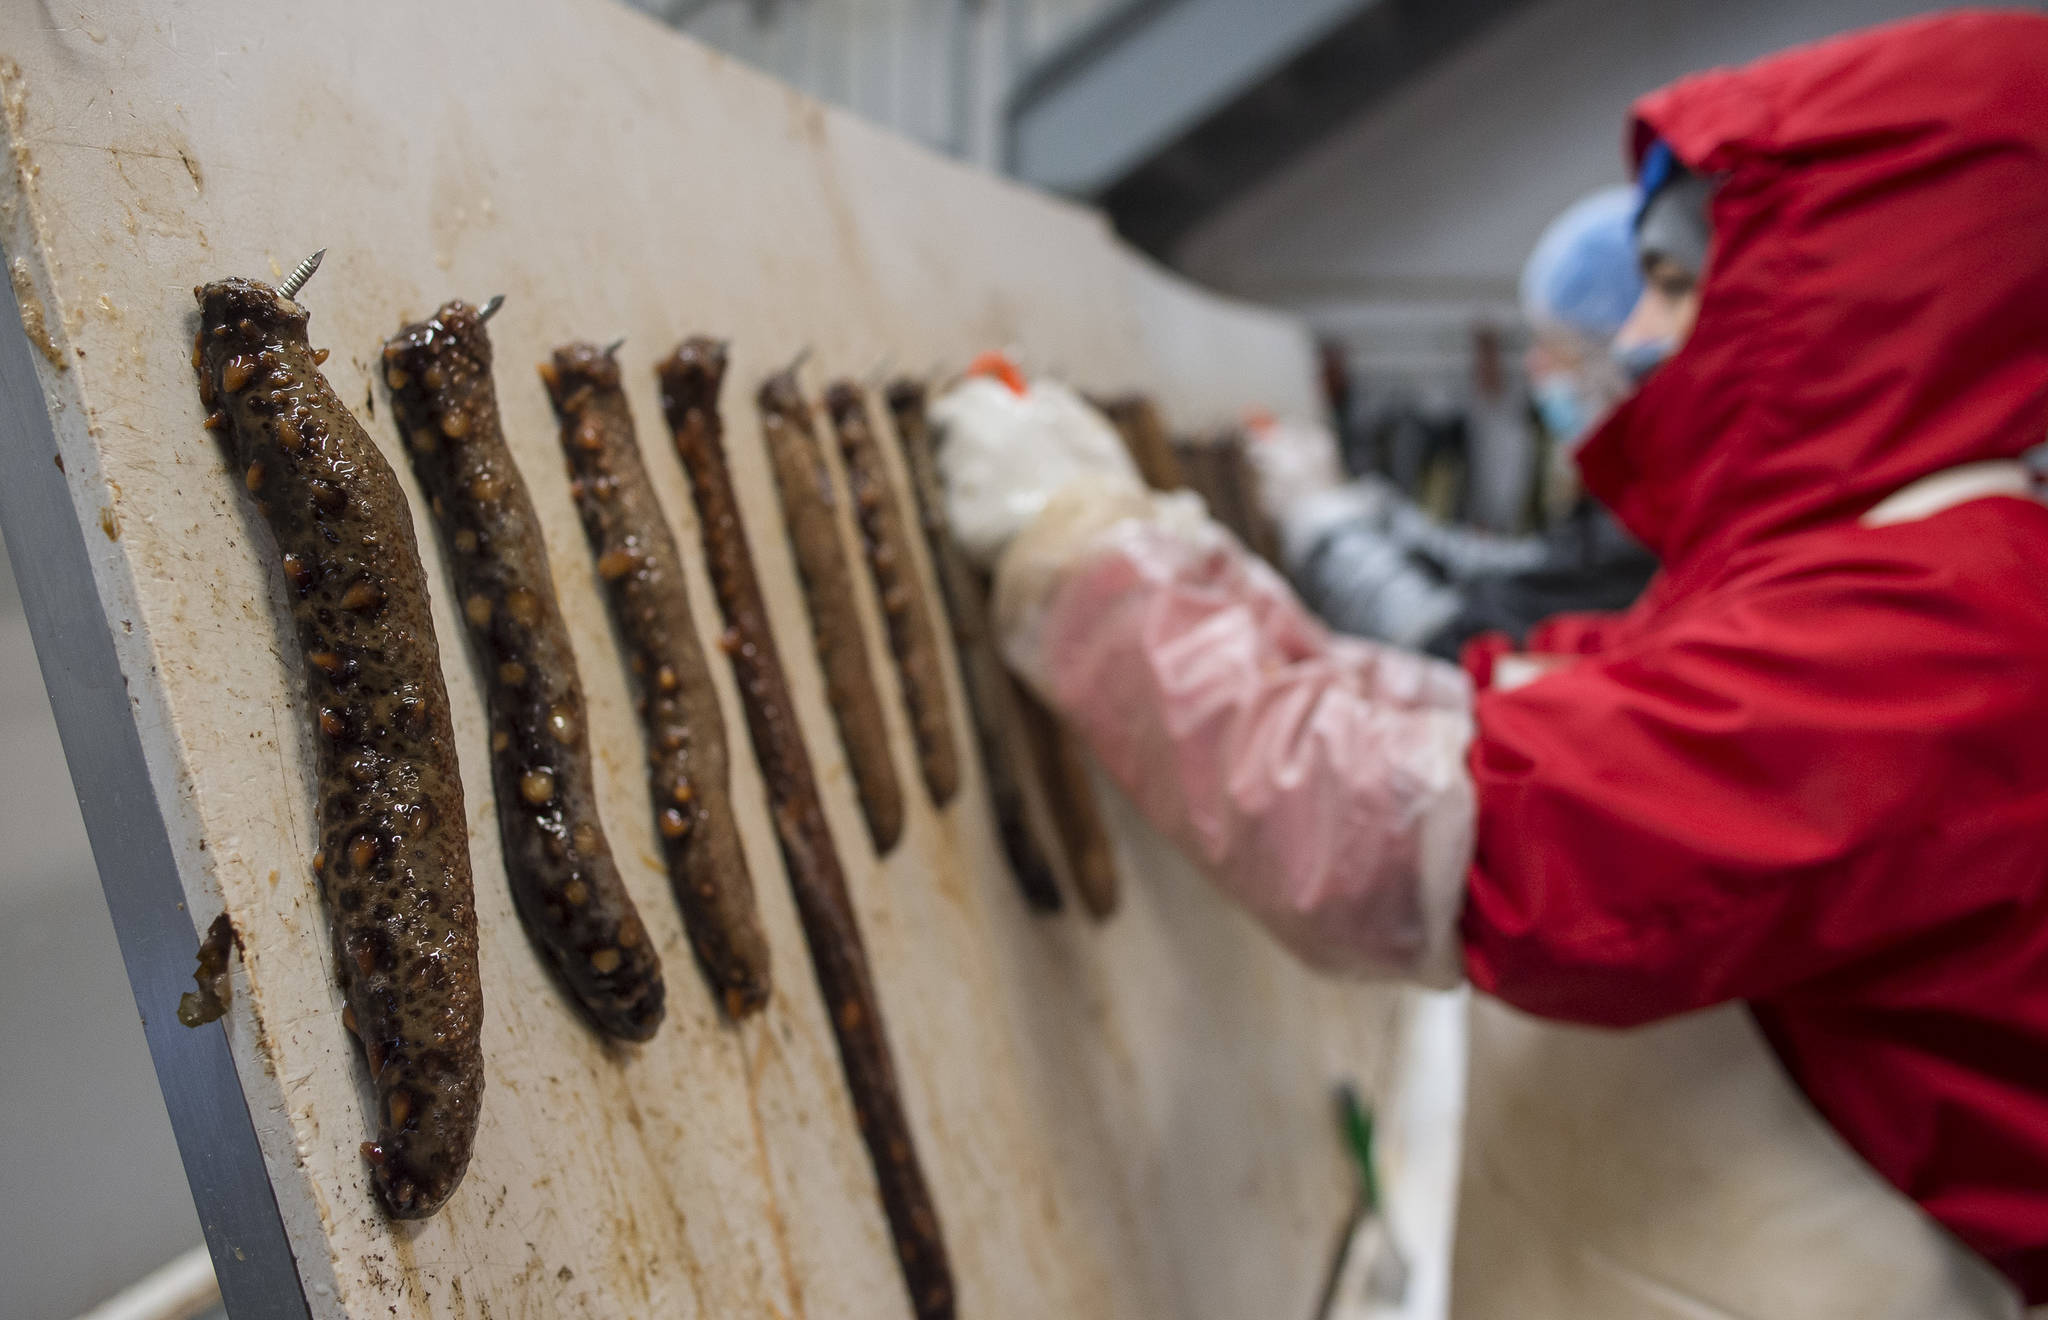 Sea cucumbers are cut open and the meat scraped out during processing at Alaska Glacier Seafoods on Tuesday, Oct. 17, 2017. (Michael Penn | Juneau Empire)